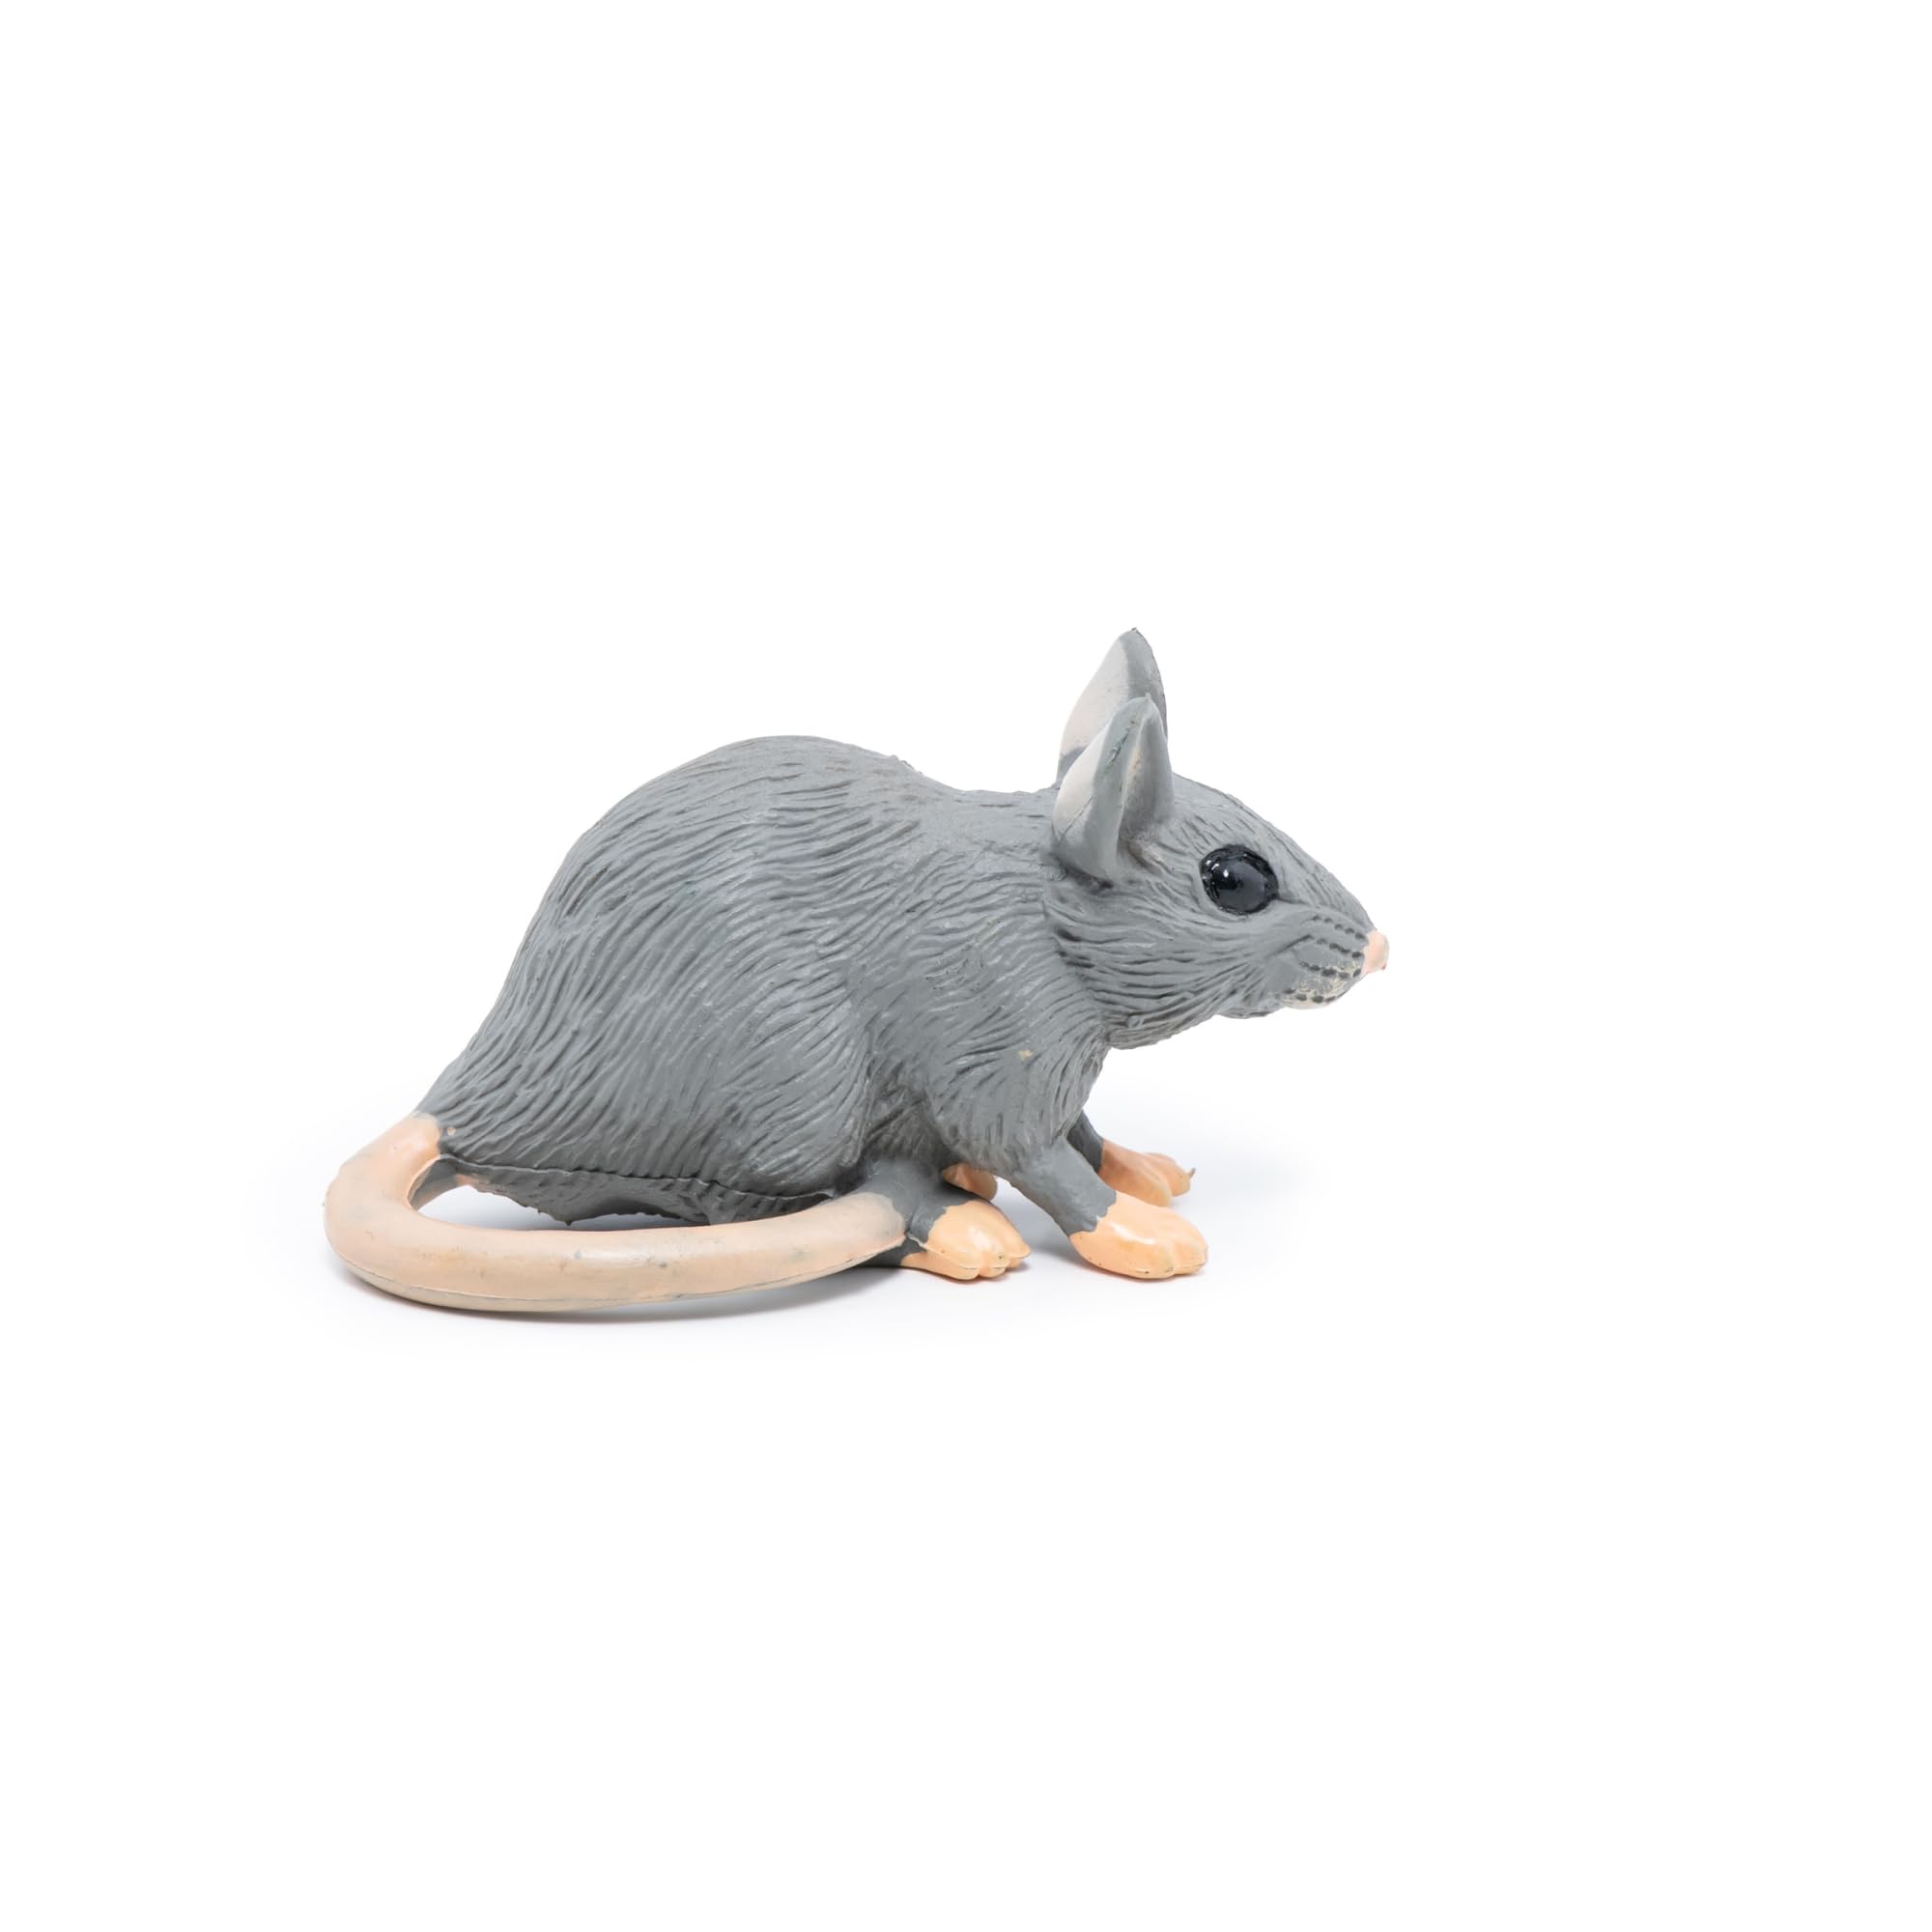 Papo -Hand-Painted - Figurine -Wild Animal Kingdom - Grey Mouse -50205 -Collectible - for Children - Suitable for Boys and Girls